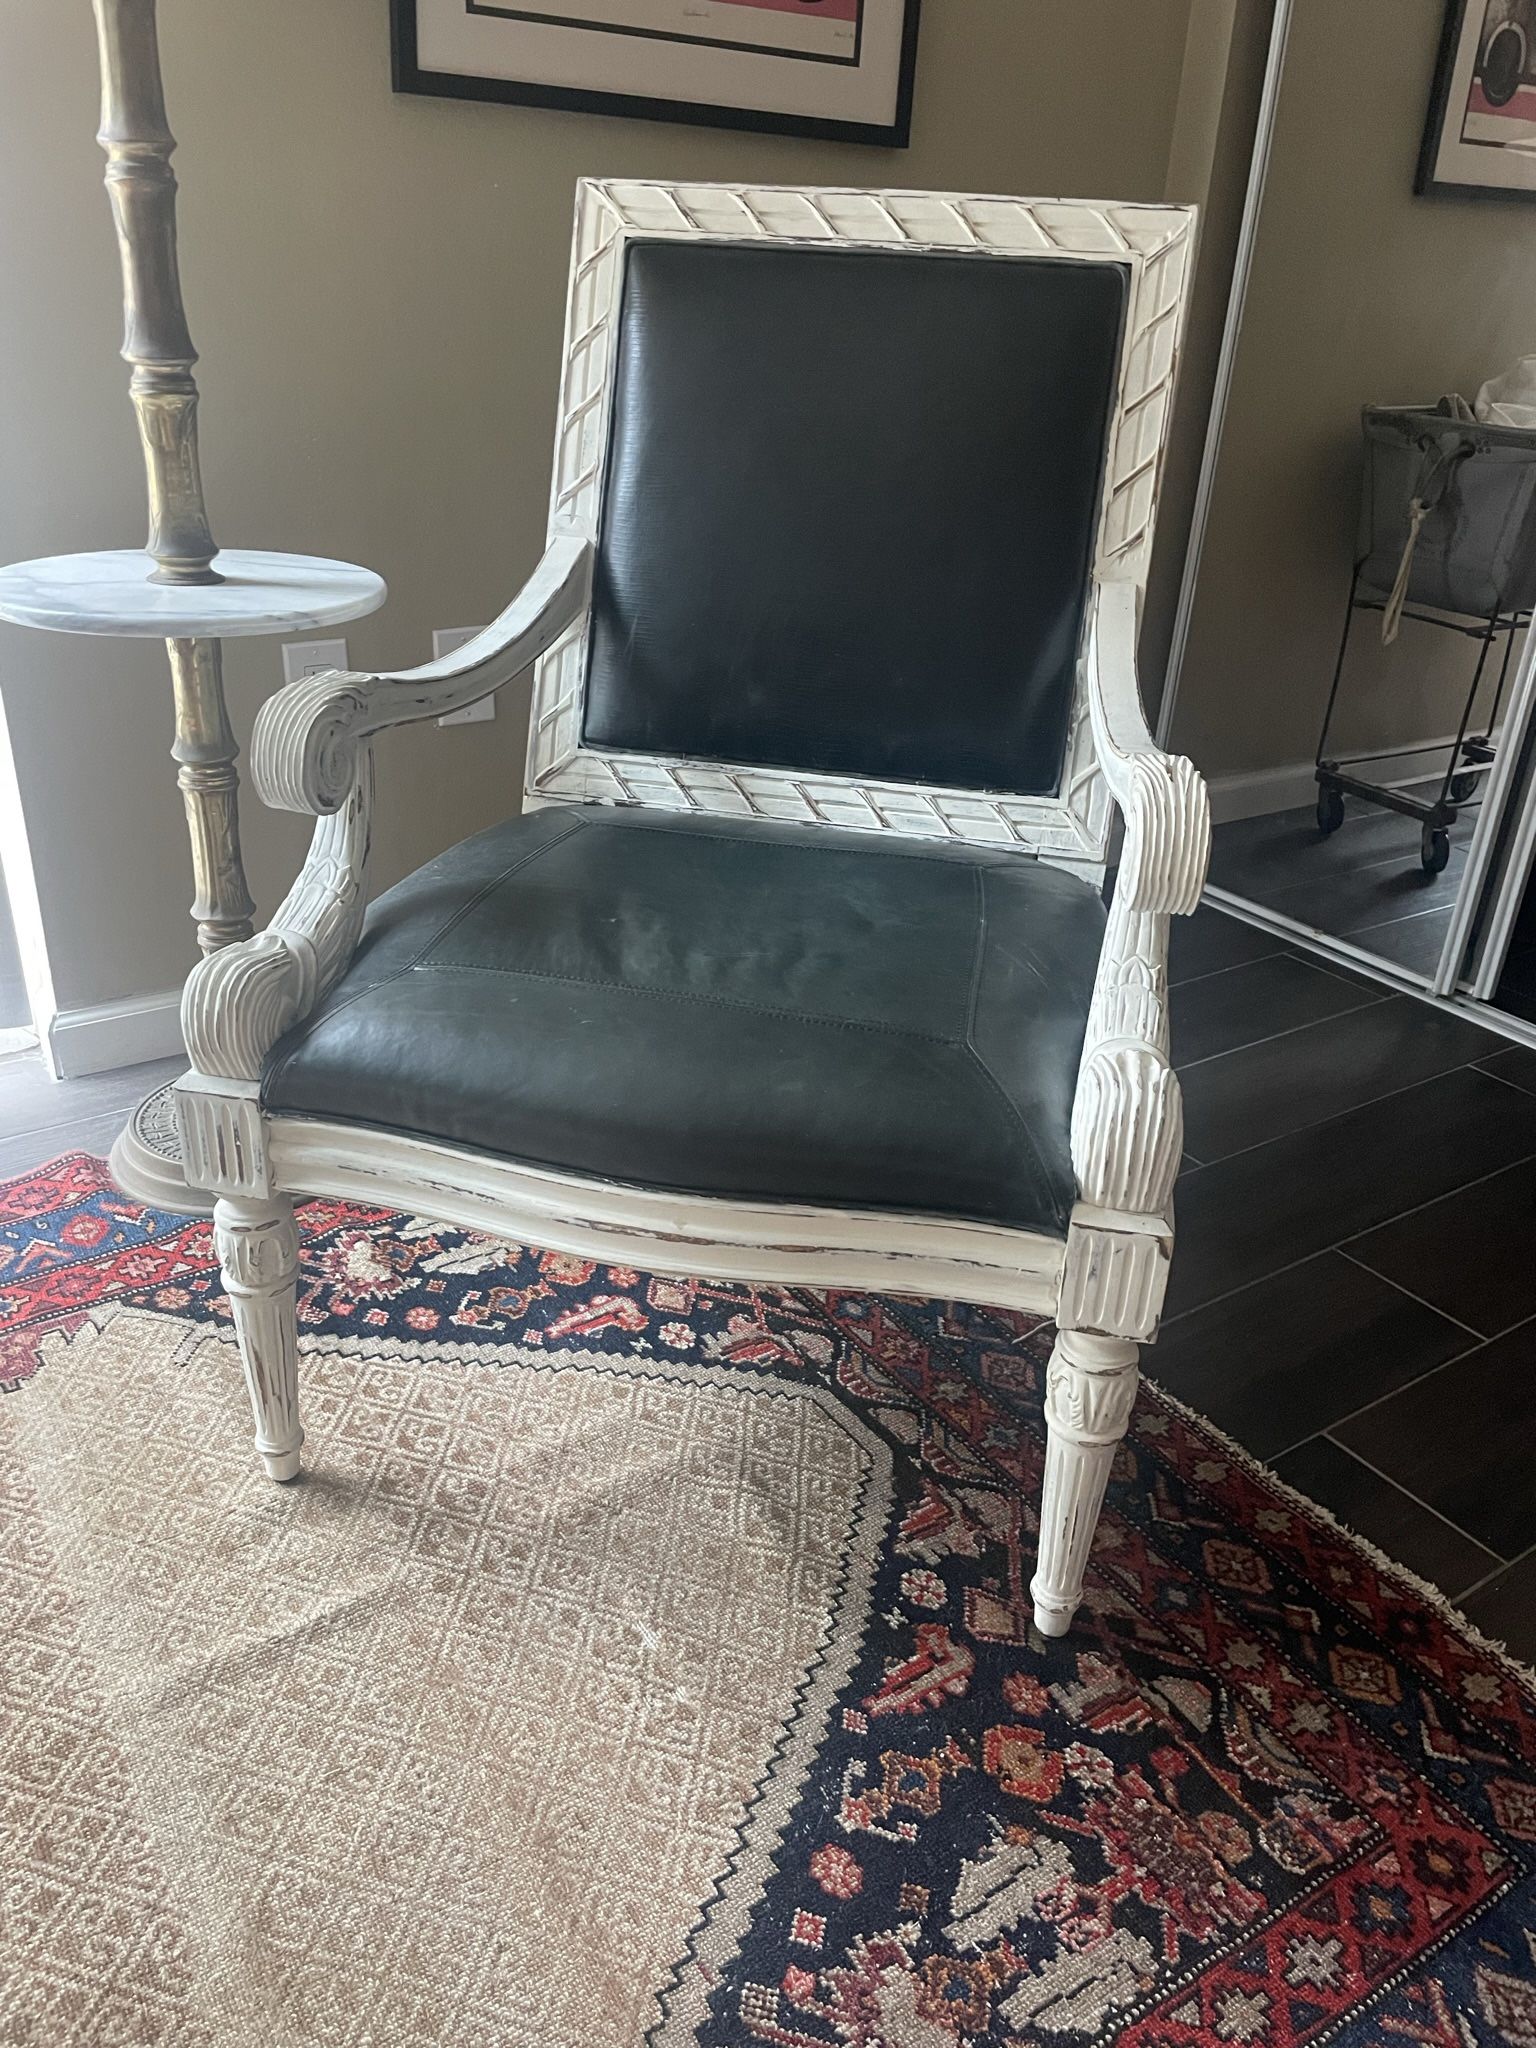 Huge Refinished Armchair 